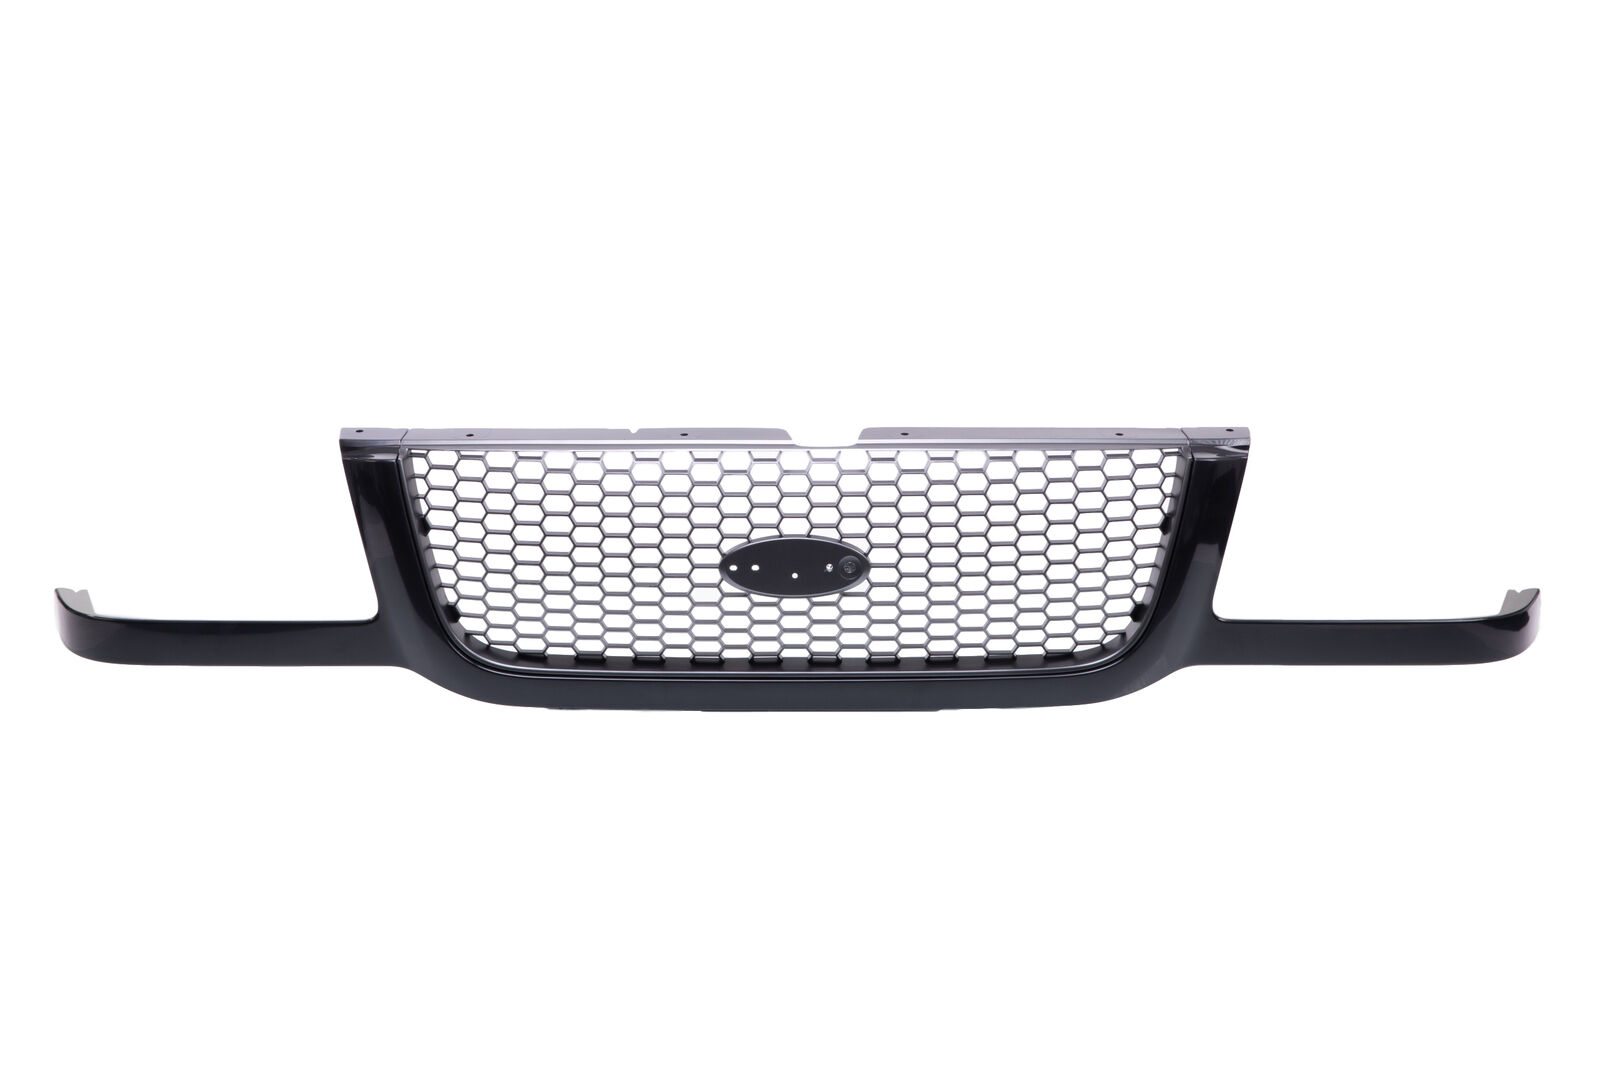 AM New Front Grille w/Argent Honeycomb Mesh Black Surround For 01-03 Ford Ranger